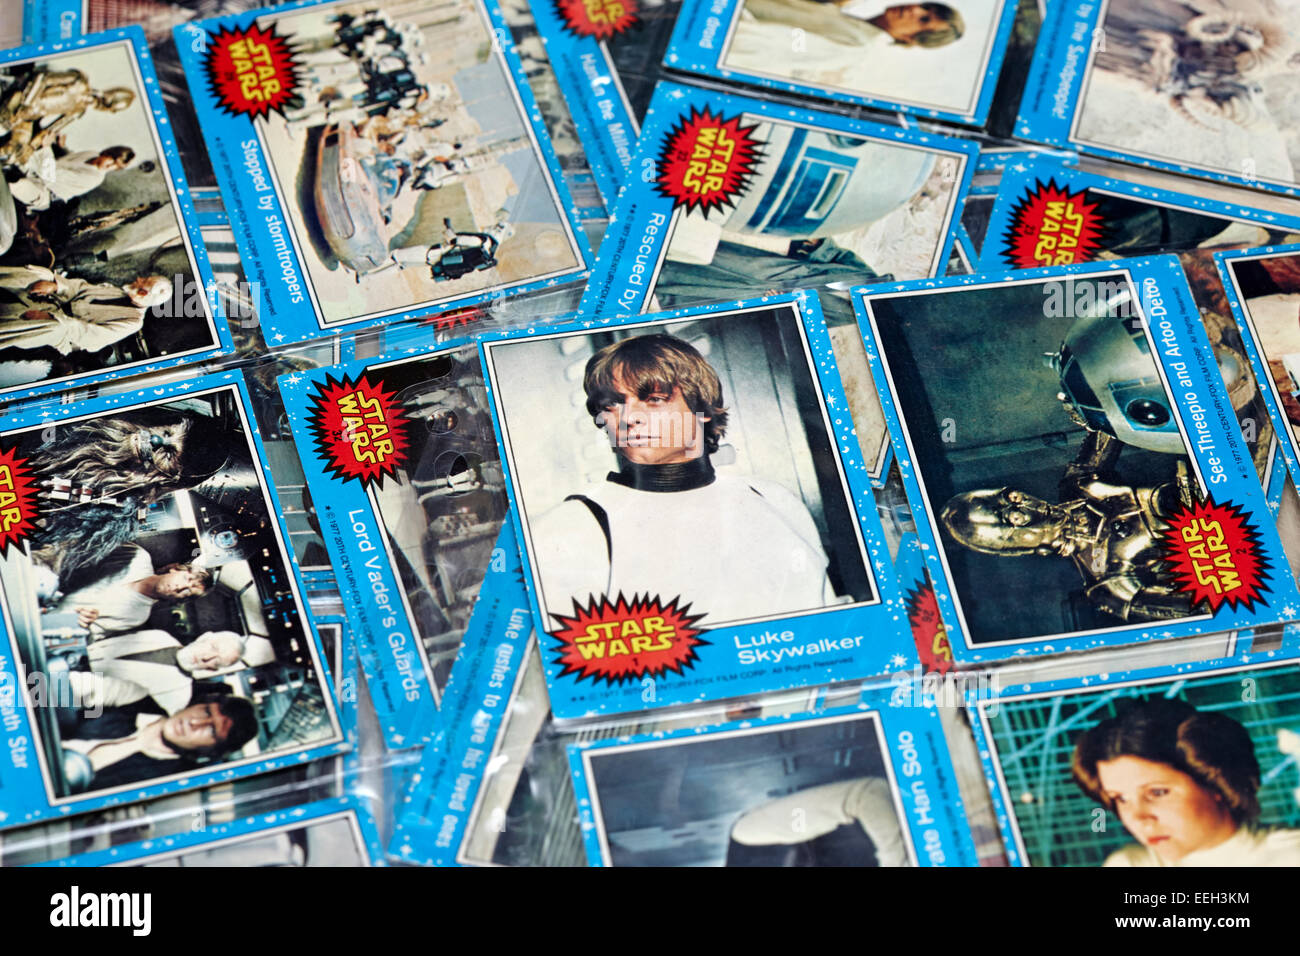 https://c8.alamy.com/comp/EEH3KM/pile-of-old-vintage-1977-original-topps-star-wars-trading-cards-EEH3KM.jpg